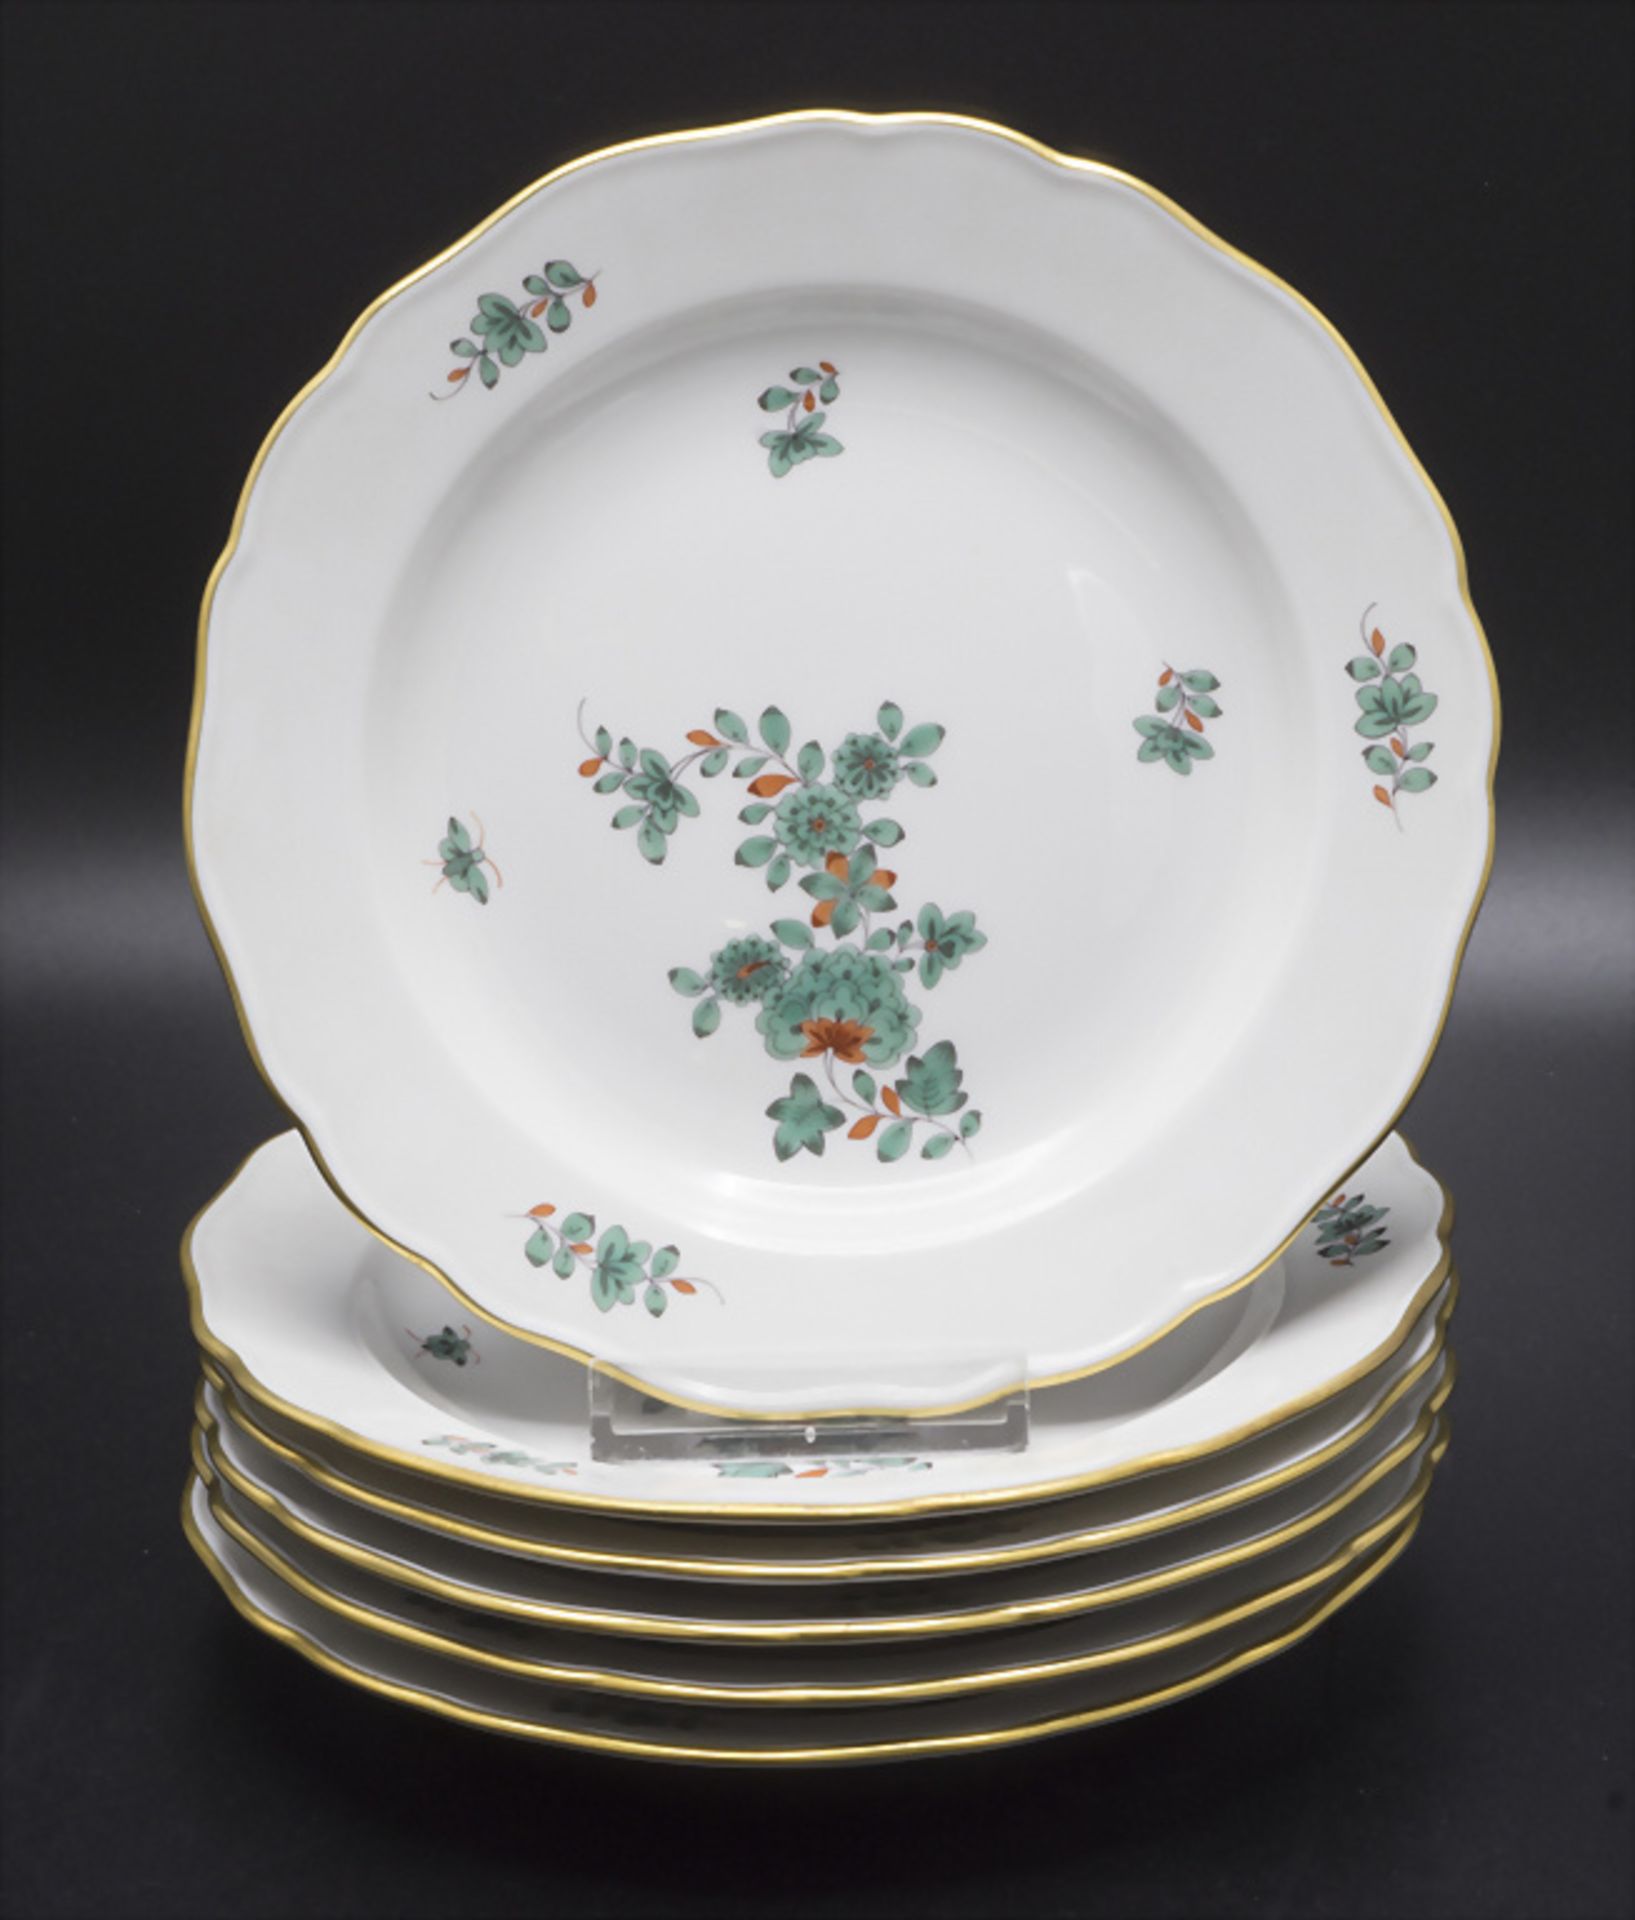 6 Kuchenteller Indianische Blume mit Falter / A set of 6 cake plates with Indian flowers and a ...